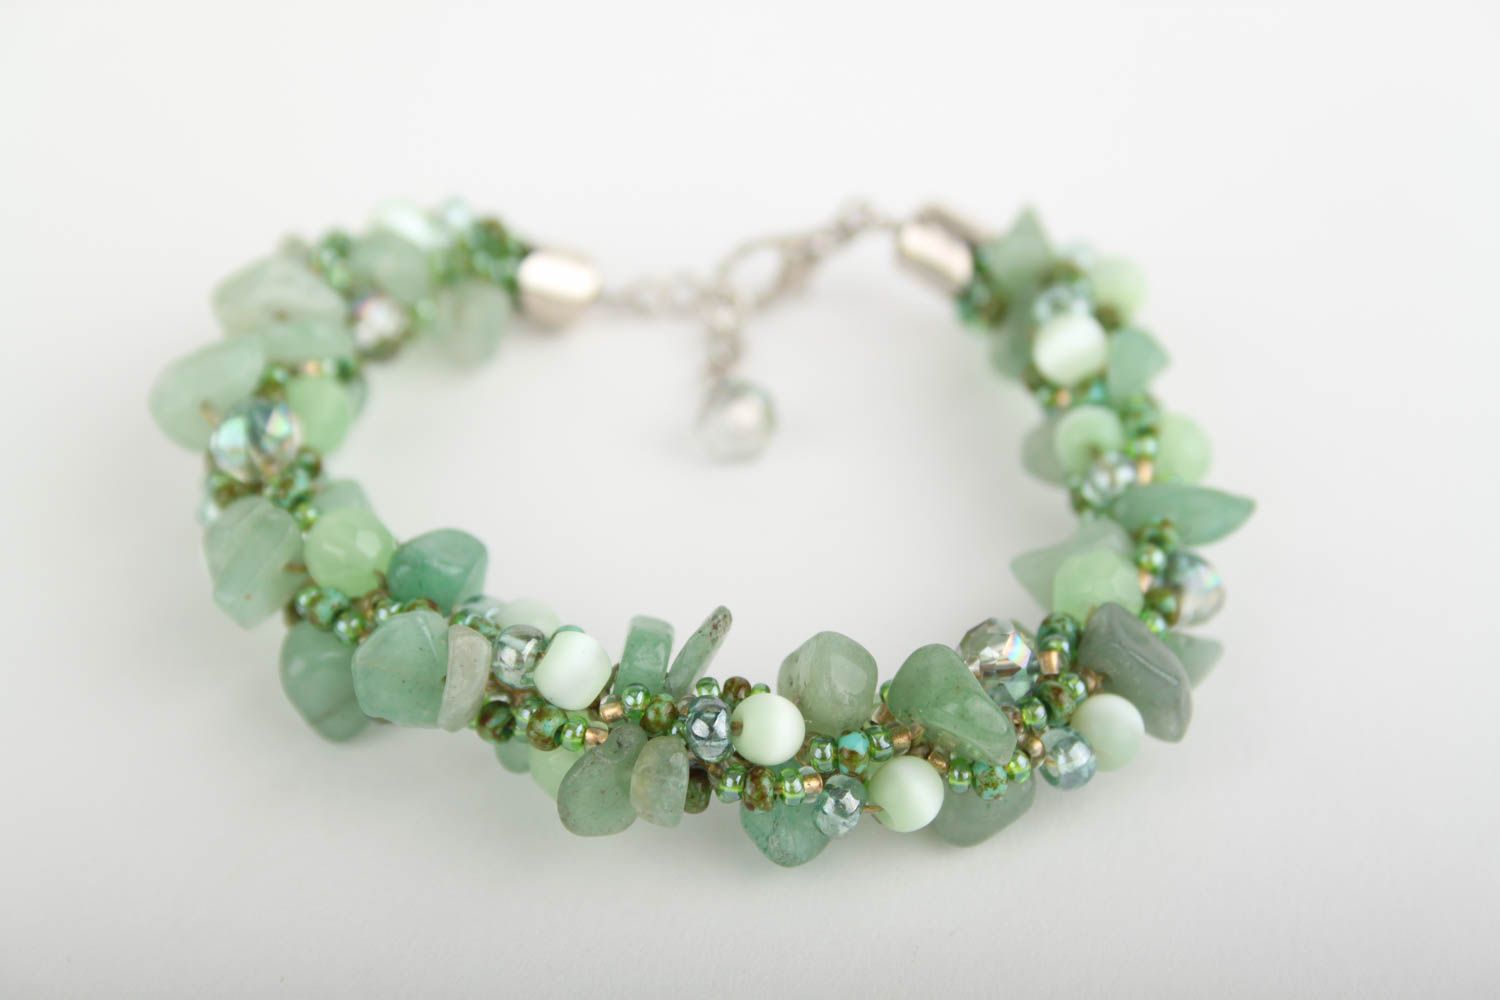 Handmade bracelet with natural stones nephritis bracelet fashion jewelry for her photo 5